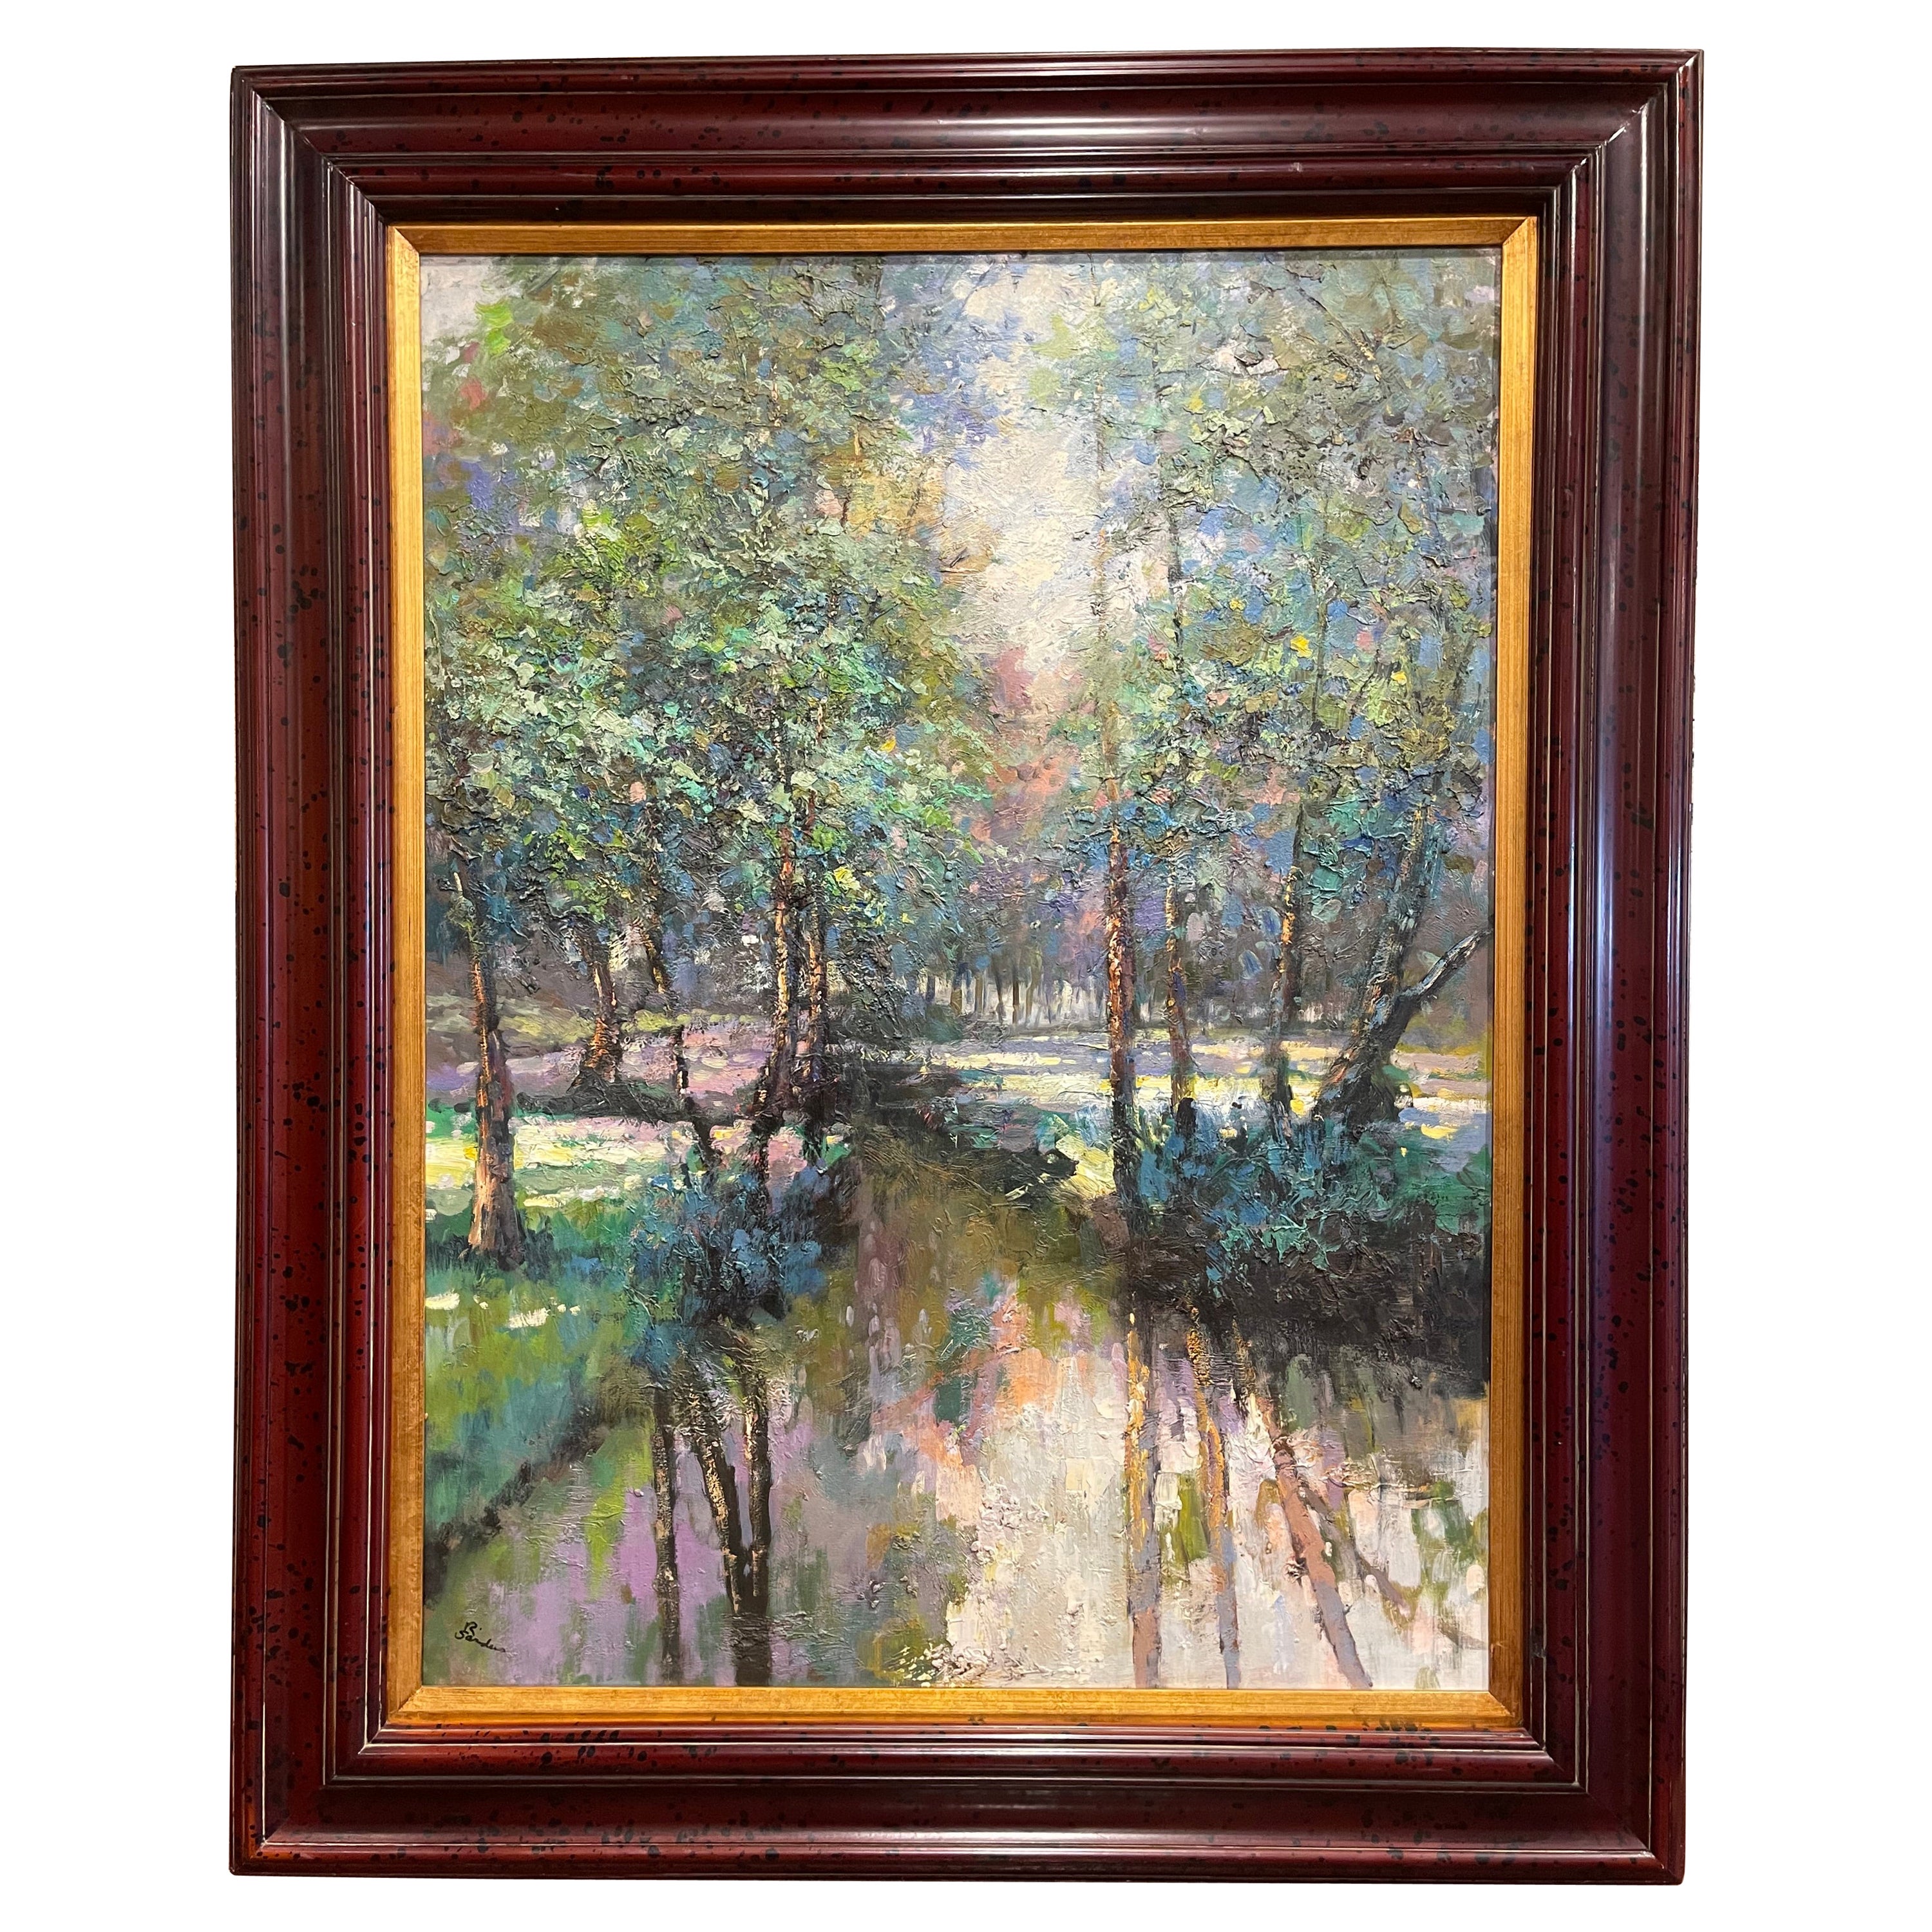 Late 20th Century Framed Oil on Canvas Landscape Painting Signed R. Sanders